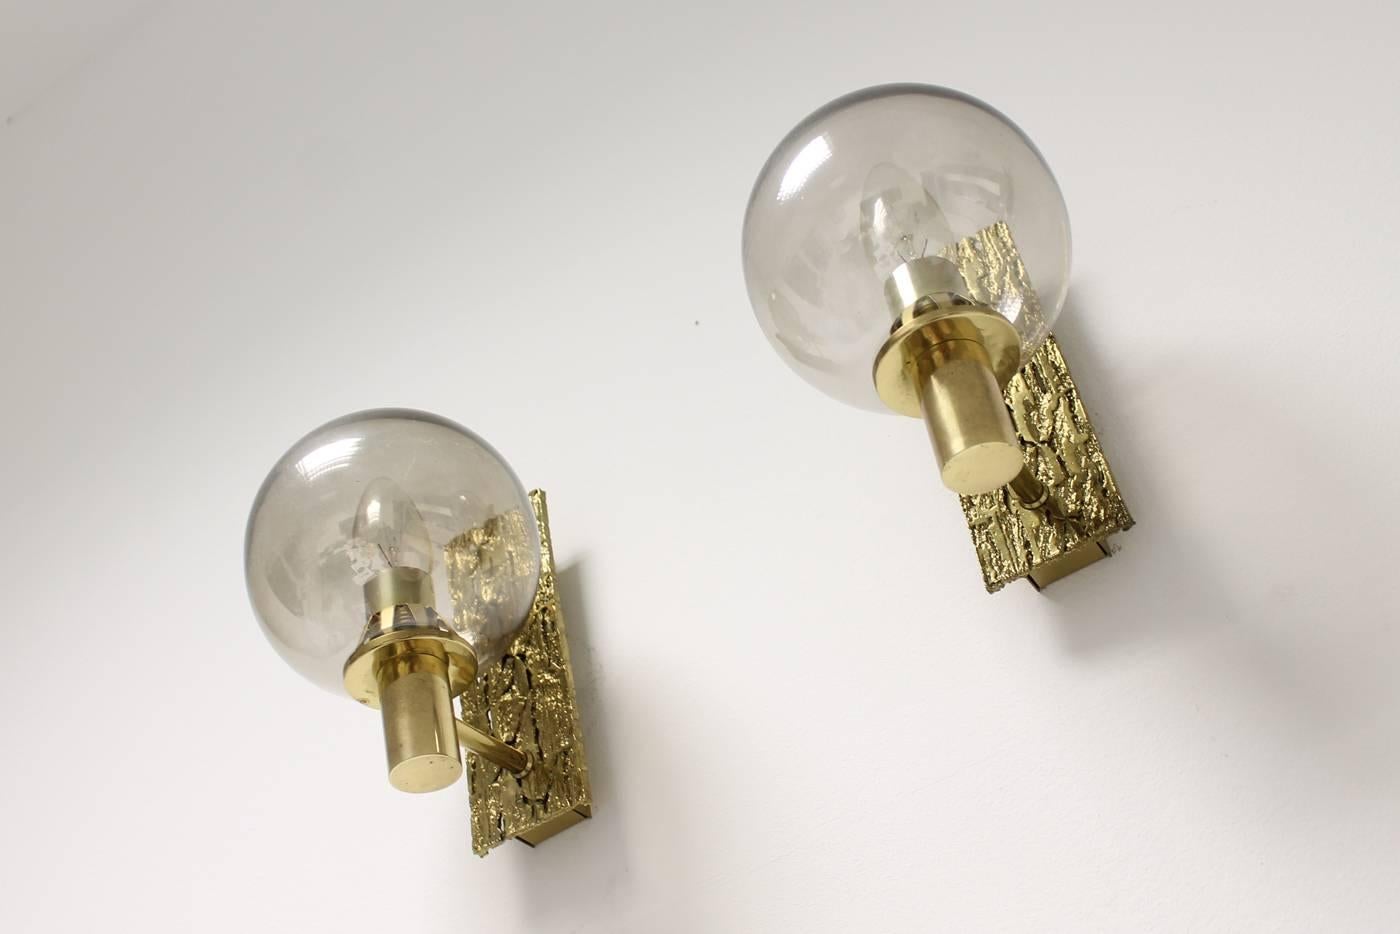 Pair of Brass and Smoked Glass Brutalist Sconces in Gold, Sweden 1960s In Good Condition For Sale In Hamminkeln, DE